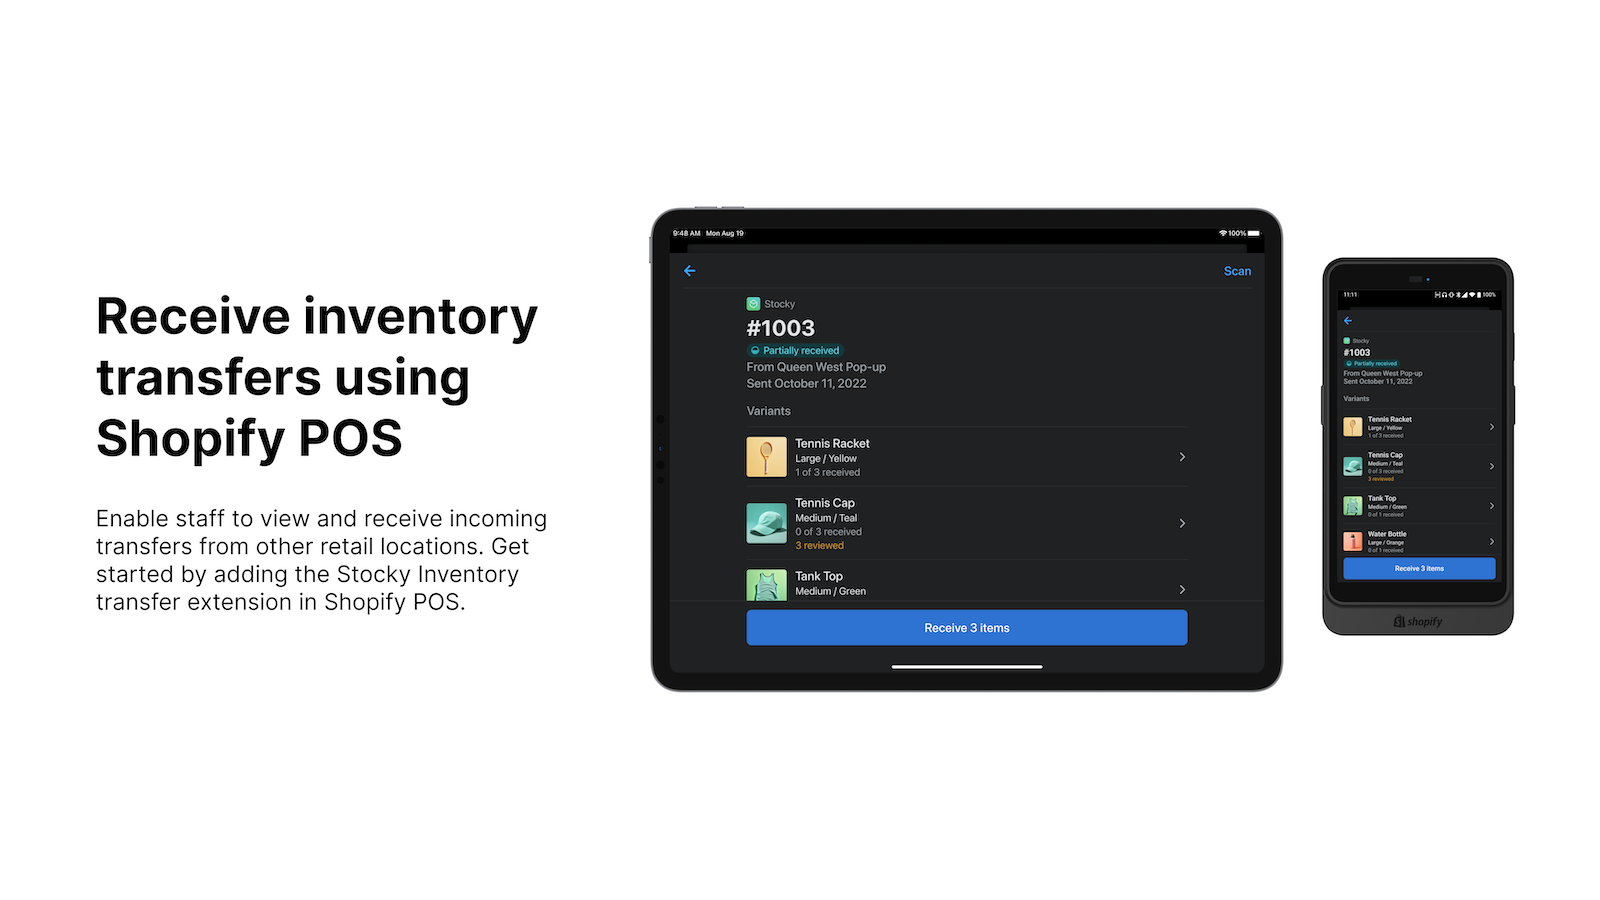 Receive inventory transfers using Shopify POS